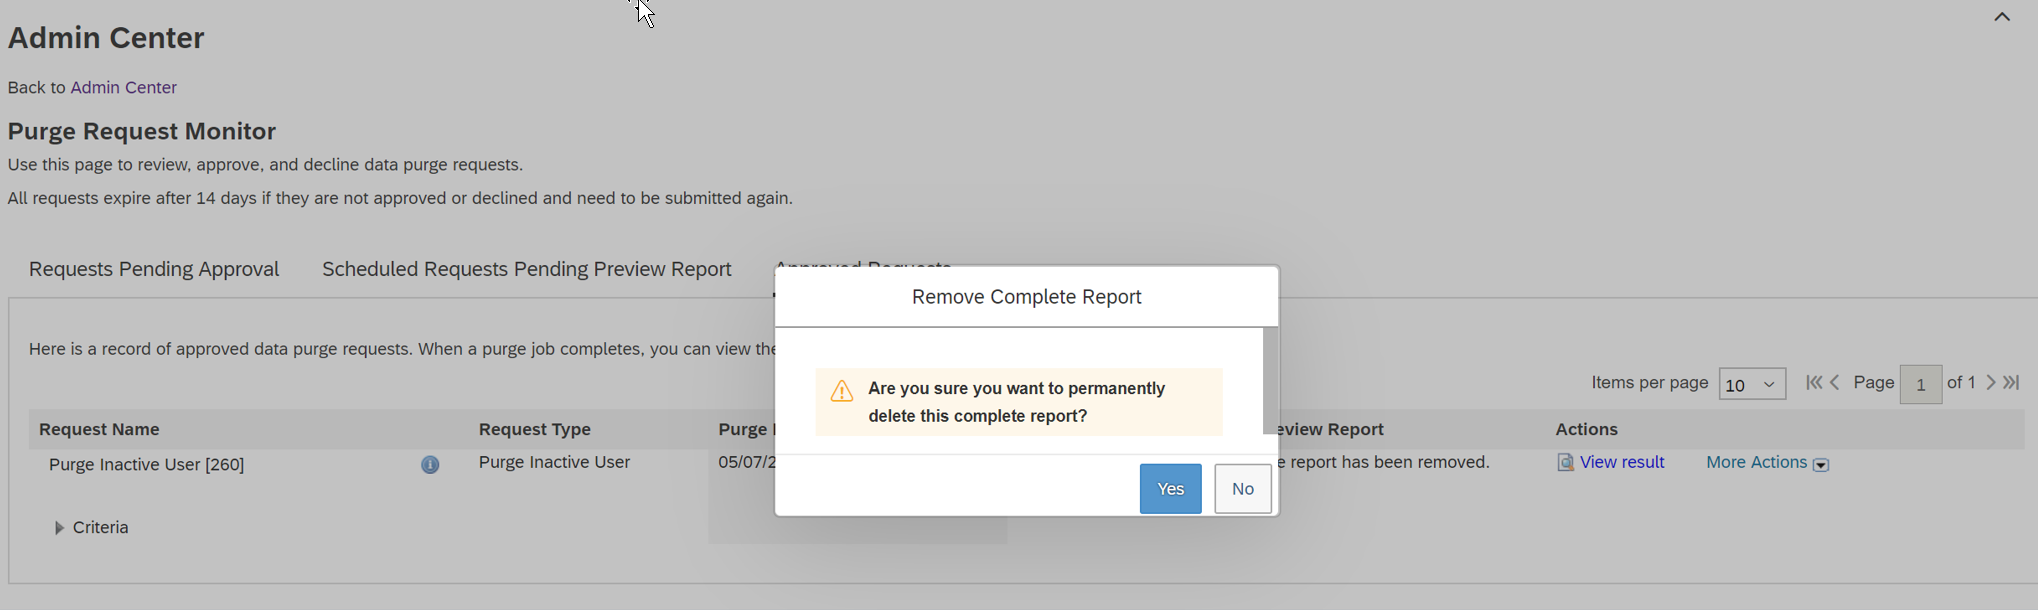 Delete Completed Report Popup.png